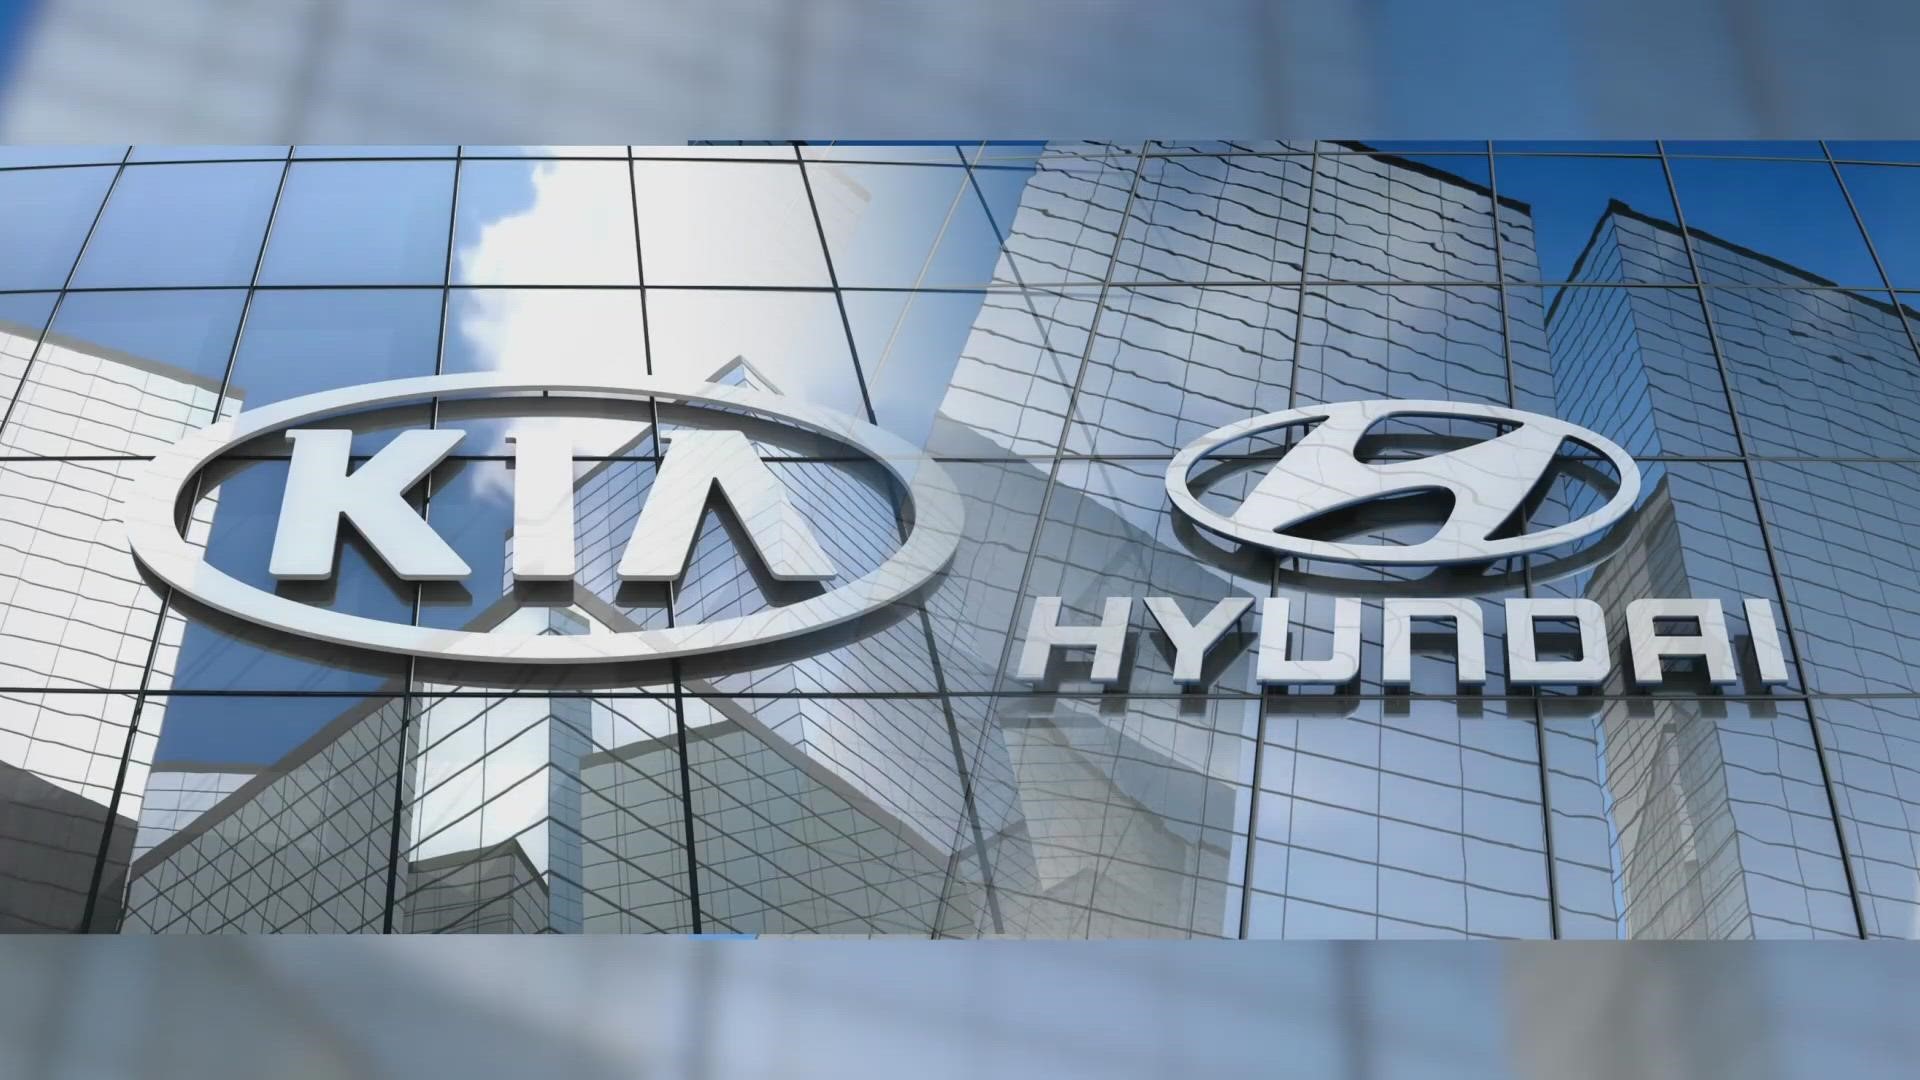 The I-Team has been following the surge in Kia and Hyundai thefts. One driver told the I-Team that a lawsuit is the only way to hold the car companies accountable.